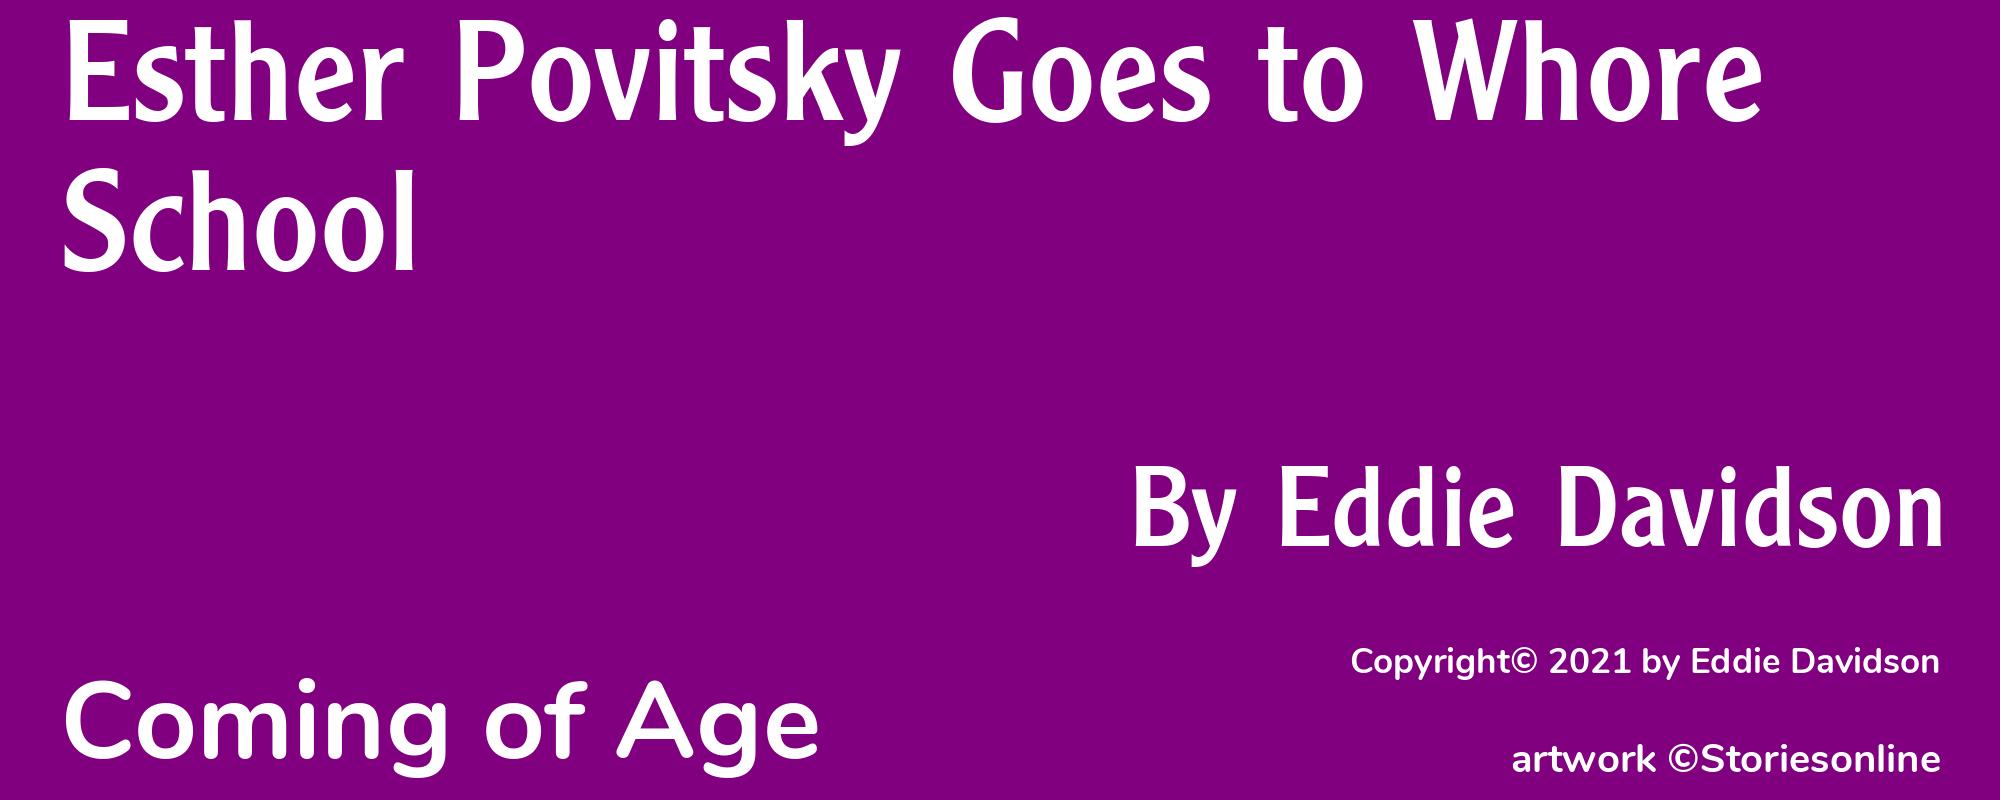 Esther Povitsky Goes to Whore School - Cover